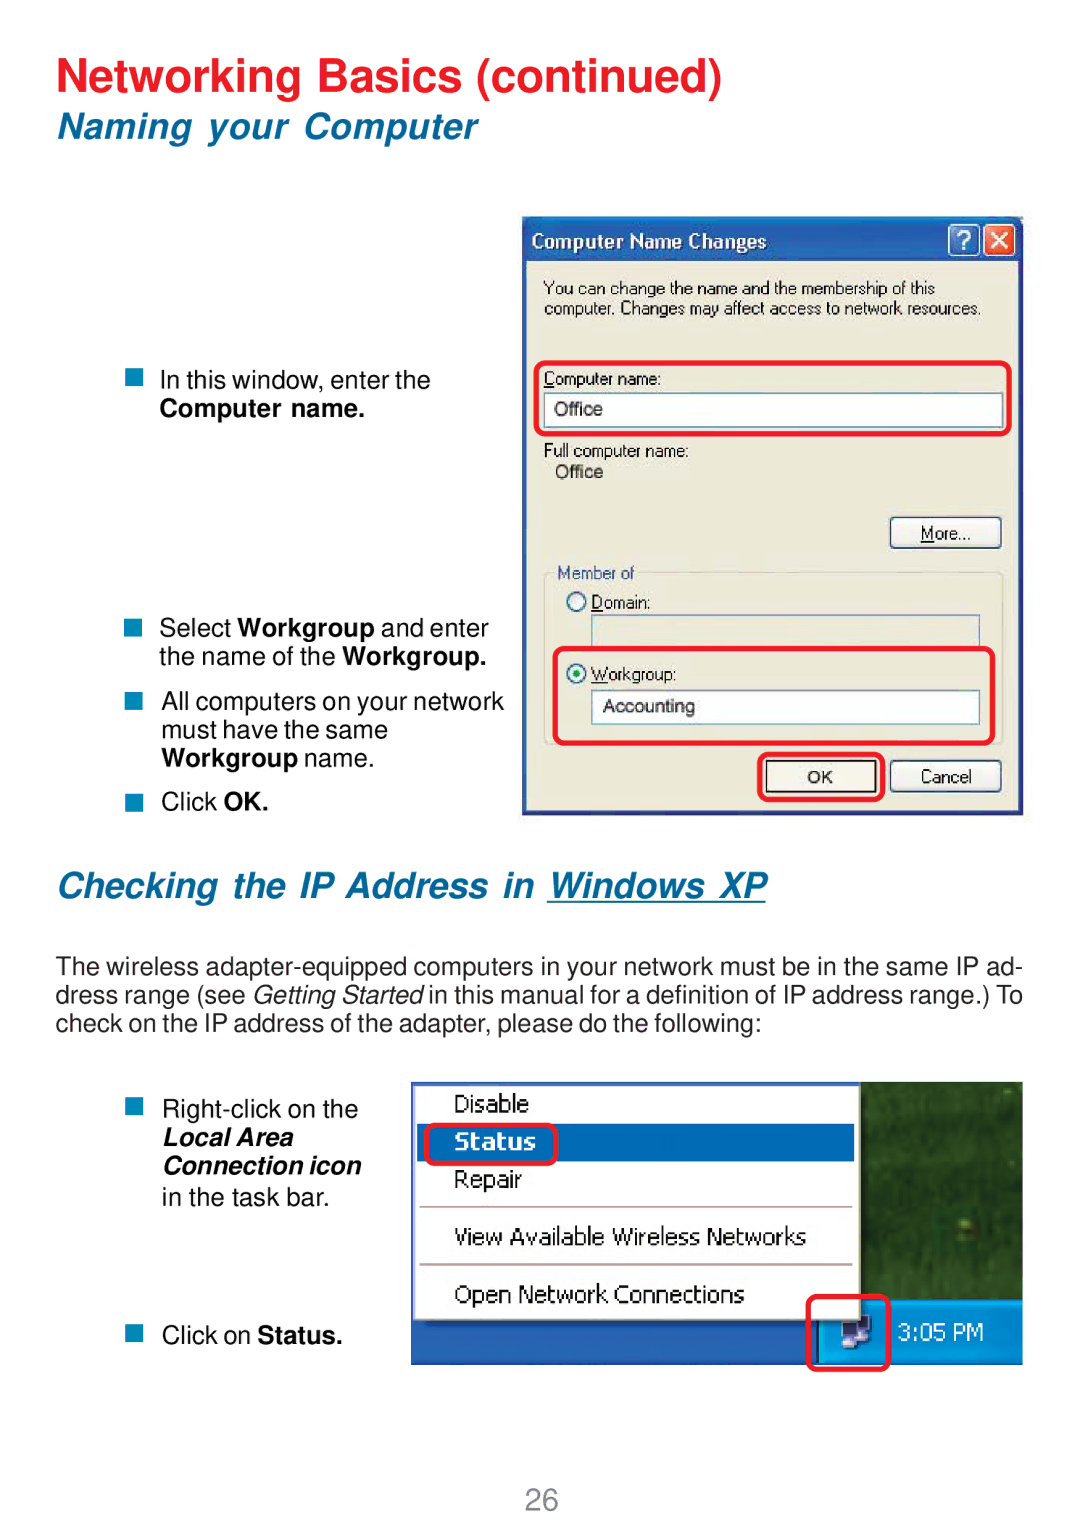 D-Link DWL-G510 manual Checking the IP Address in Windows XP, Computer name 